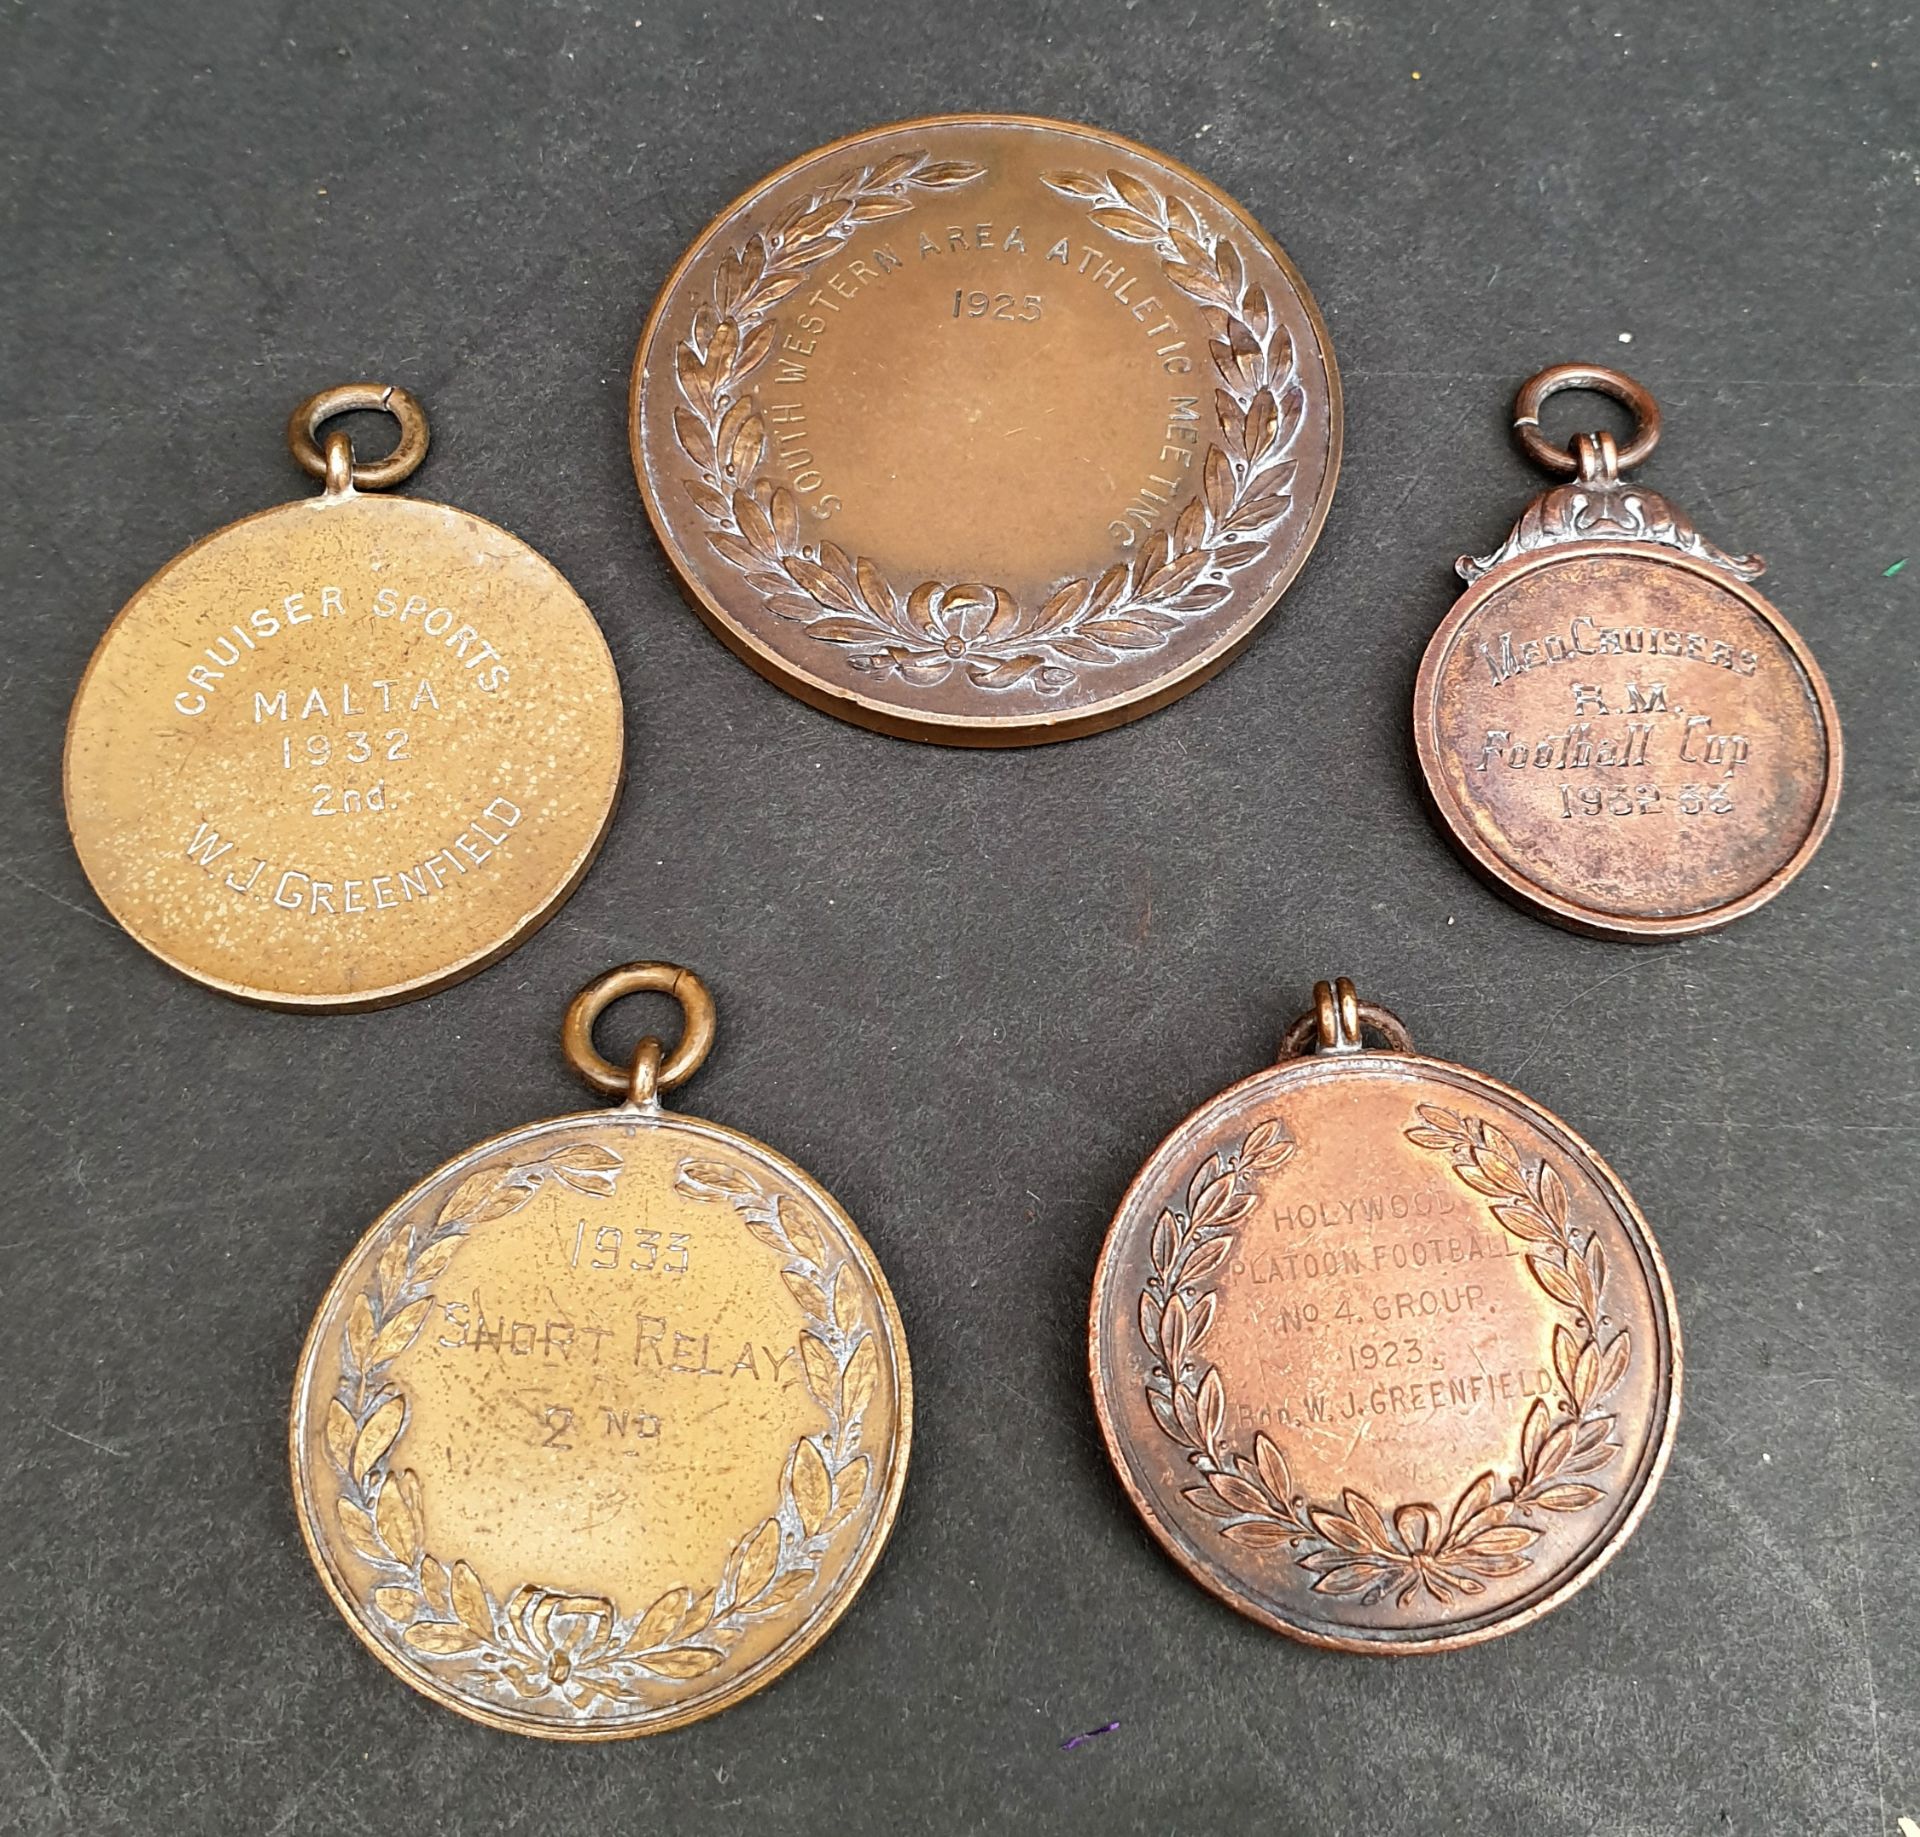 Antique Vintage 5 x Military Royal Navy Sporting and Football Medals 1930's Awarded To Royal Marines - Image 2 of 7